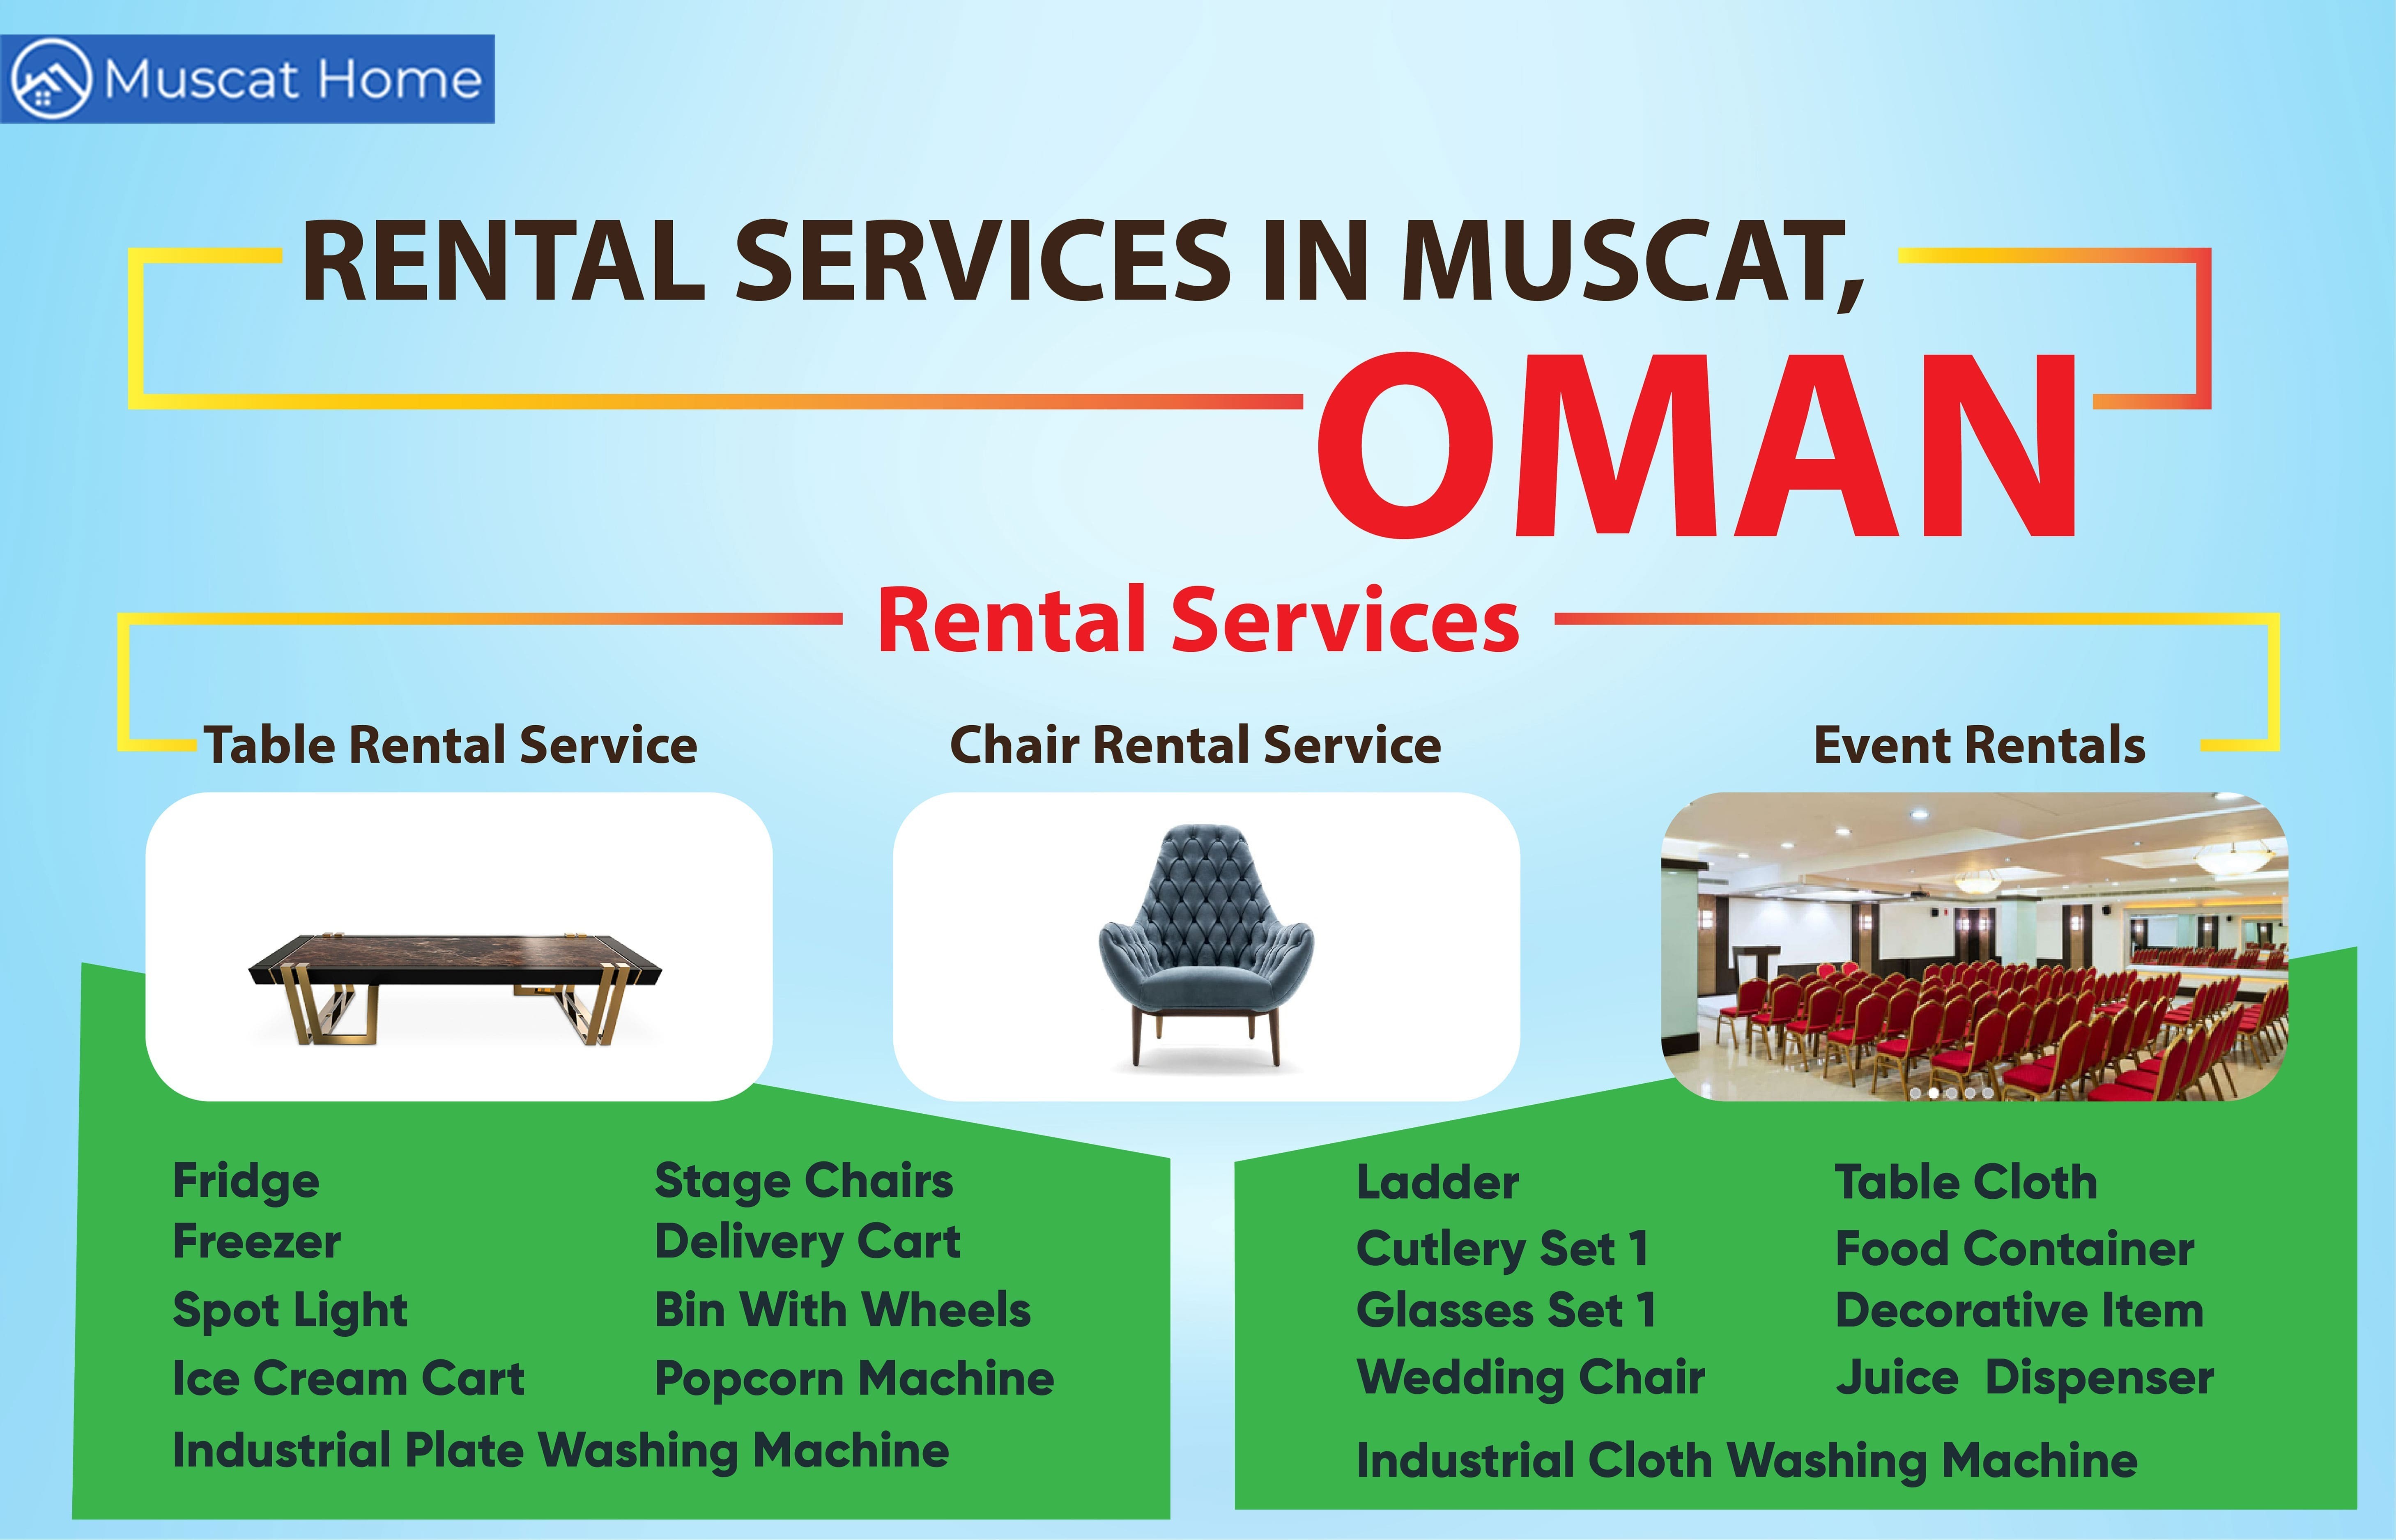 Best Housemaid Service Providing Agency for Muscat  Muscat Home